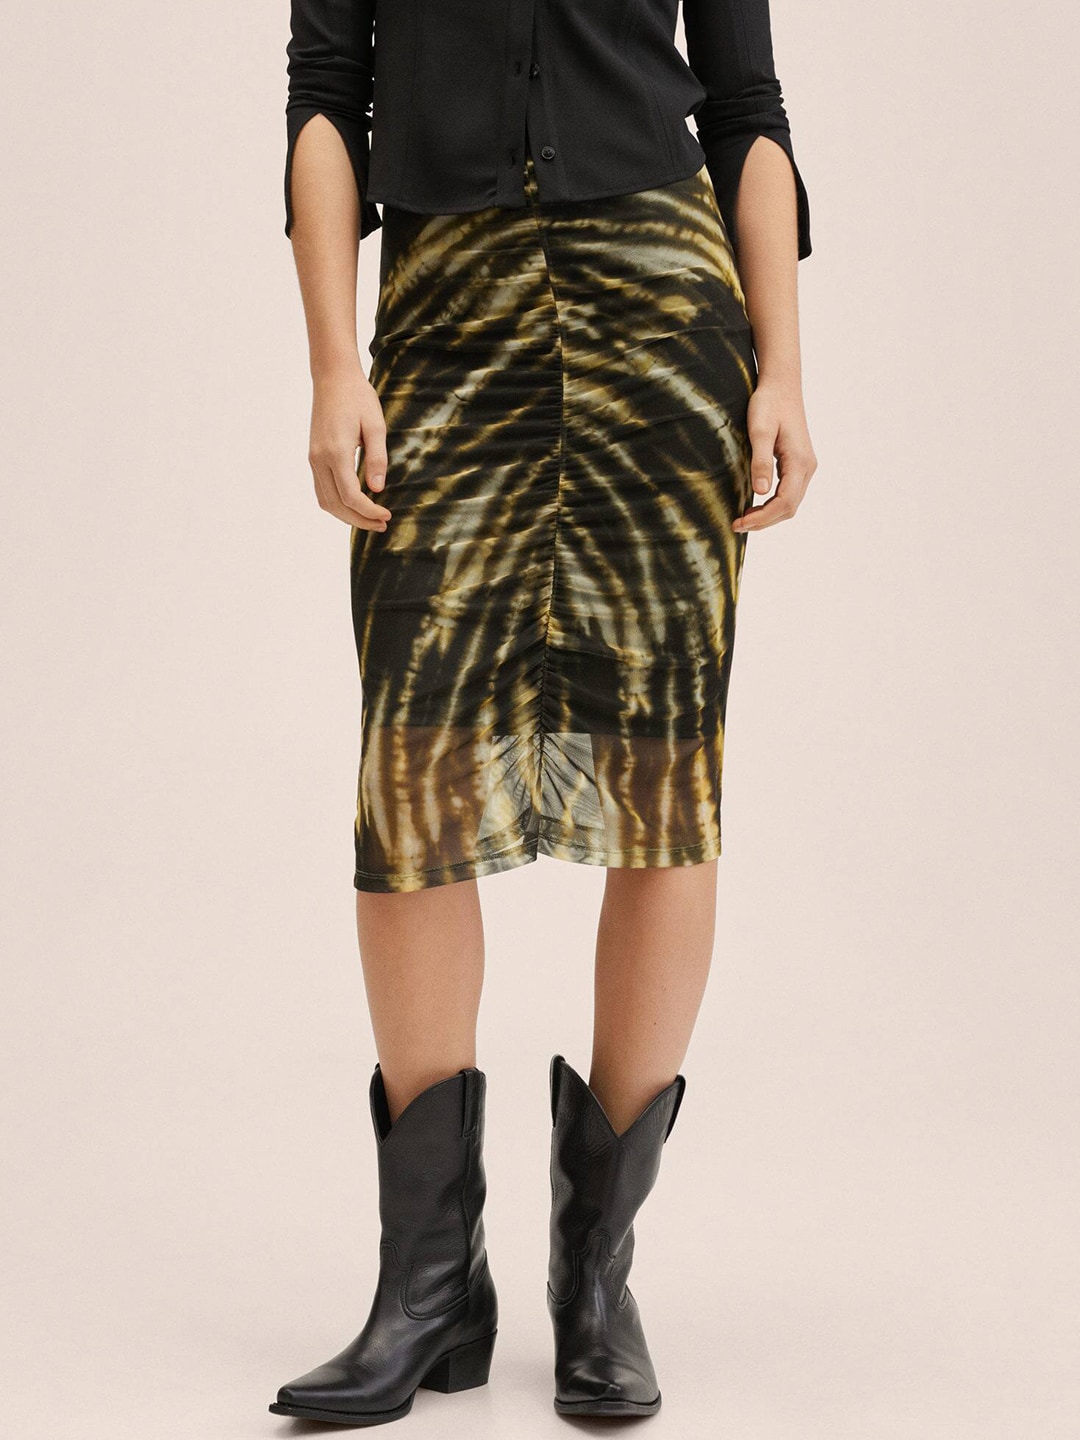 MANGO Women Black & Yellow Tie & Dye Ruched Pencil Skirt Price in India